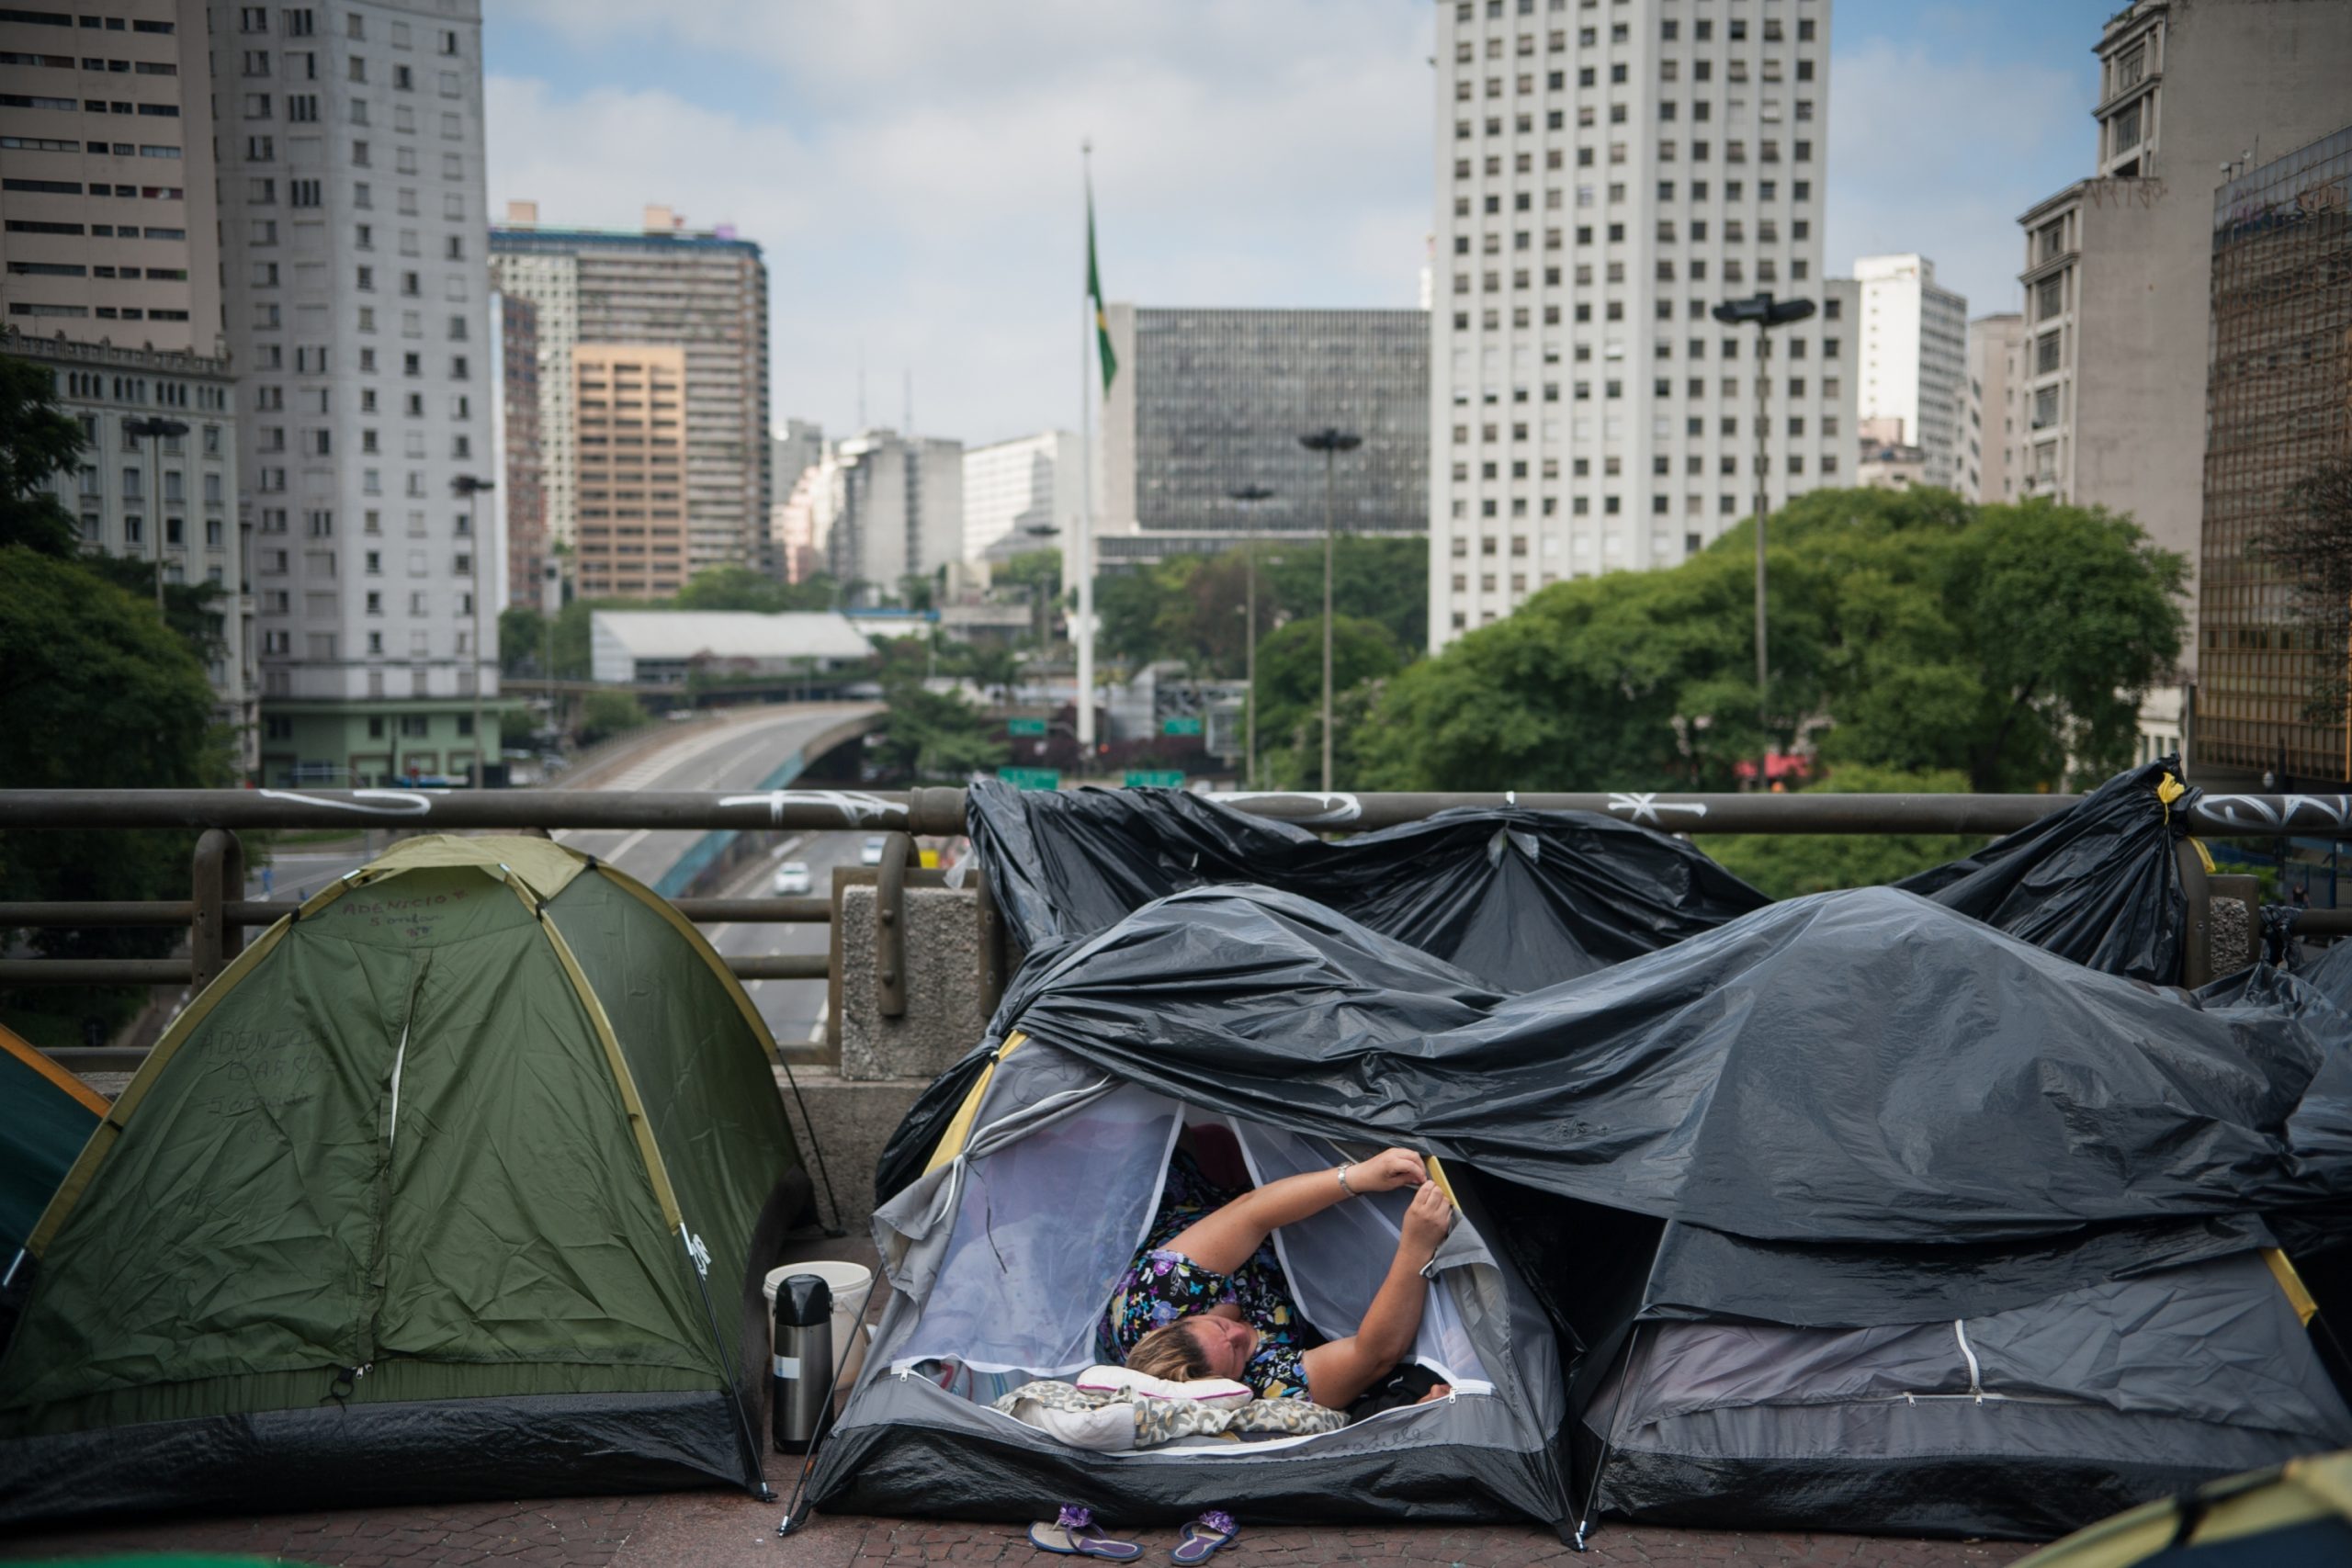 According to data from the Research Institute for Applied Economics (IPEA), there are over 100,000 homeless people in Brazil.